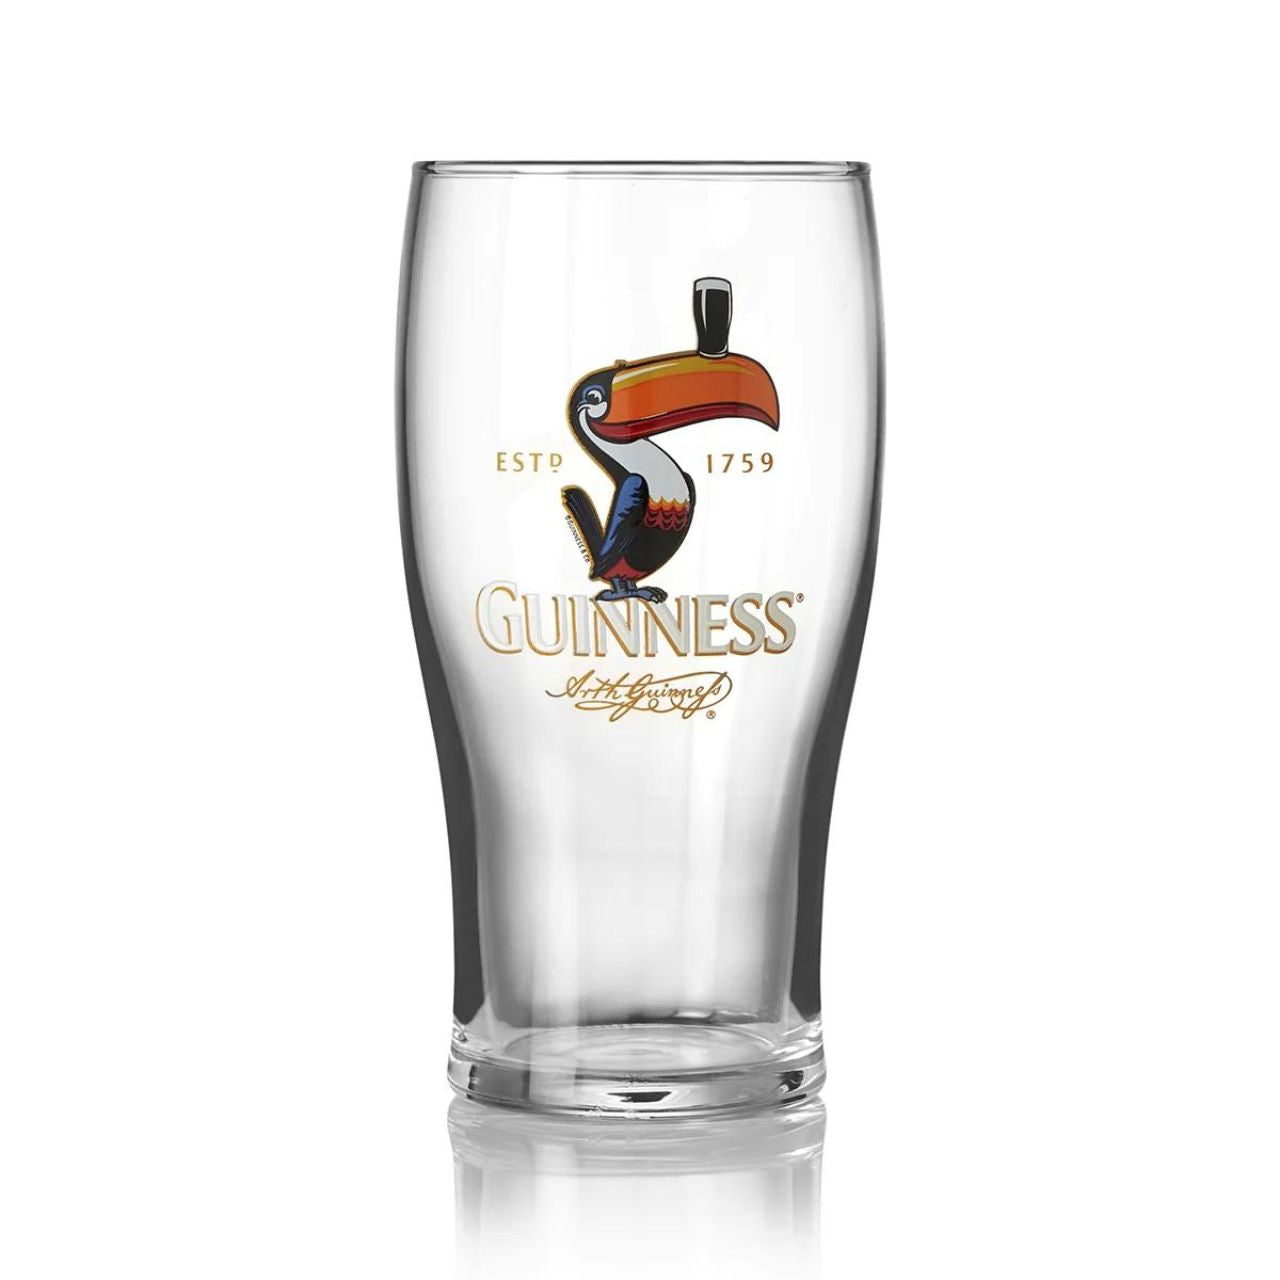 Nostalgic, unique and eye catching, the retro Guinness toucan pint glass is the perfect addition to your pint glass collection. It's also a great gift for fans of the iconic Gilroy illustrations and the smooth, velvety taste of Guinness.